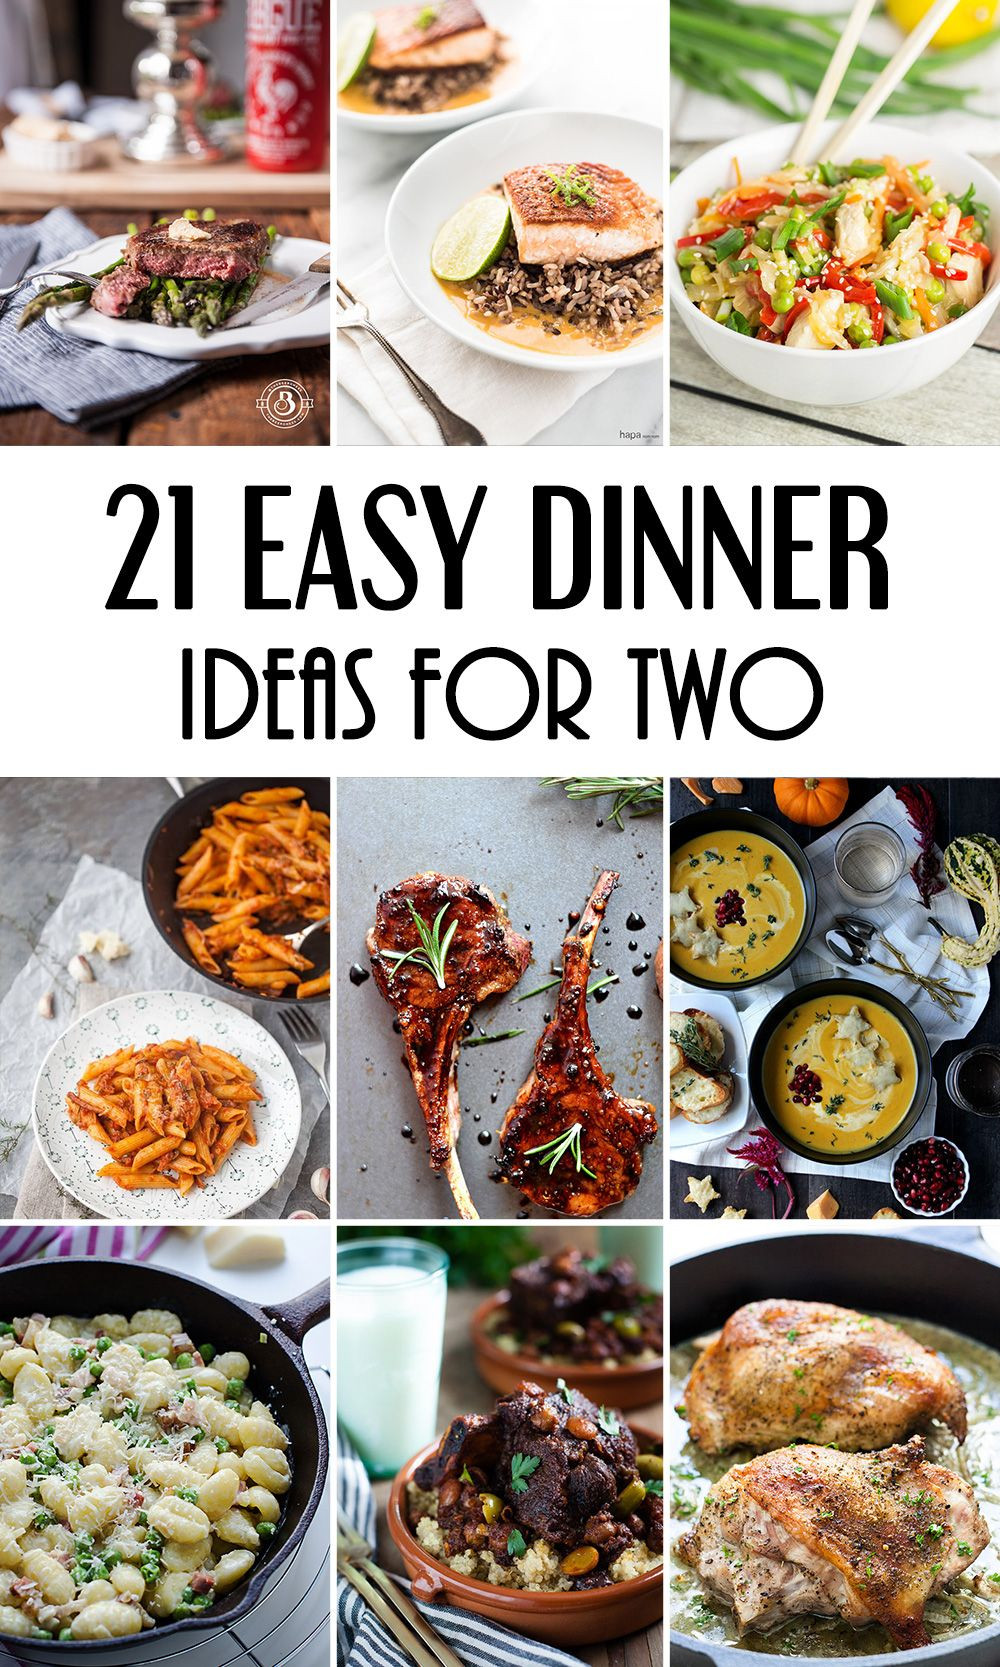 Quick Healthy Dinners For 2
 21 Easy Dinner Ideas For Two That Will Impress Your Loved